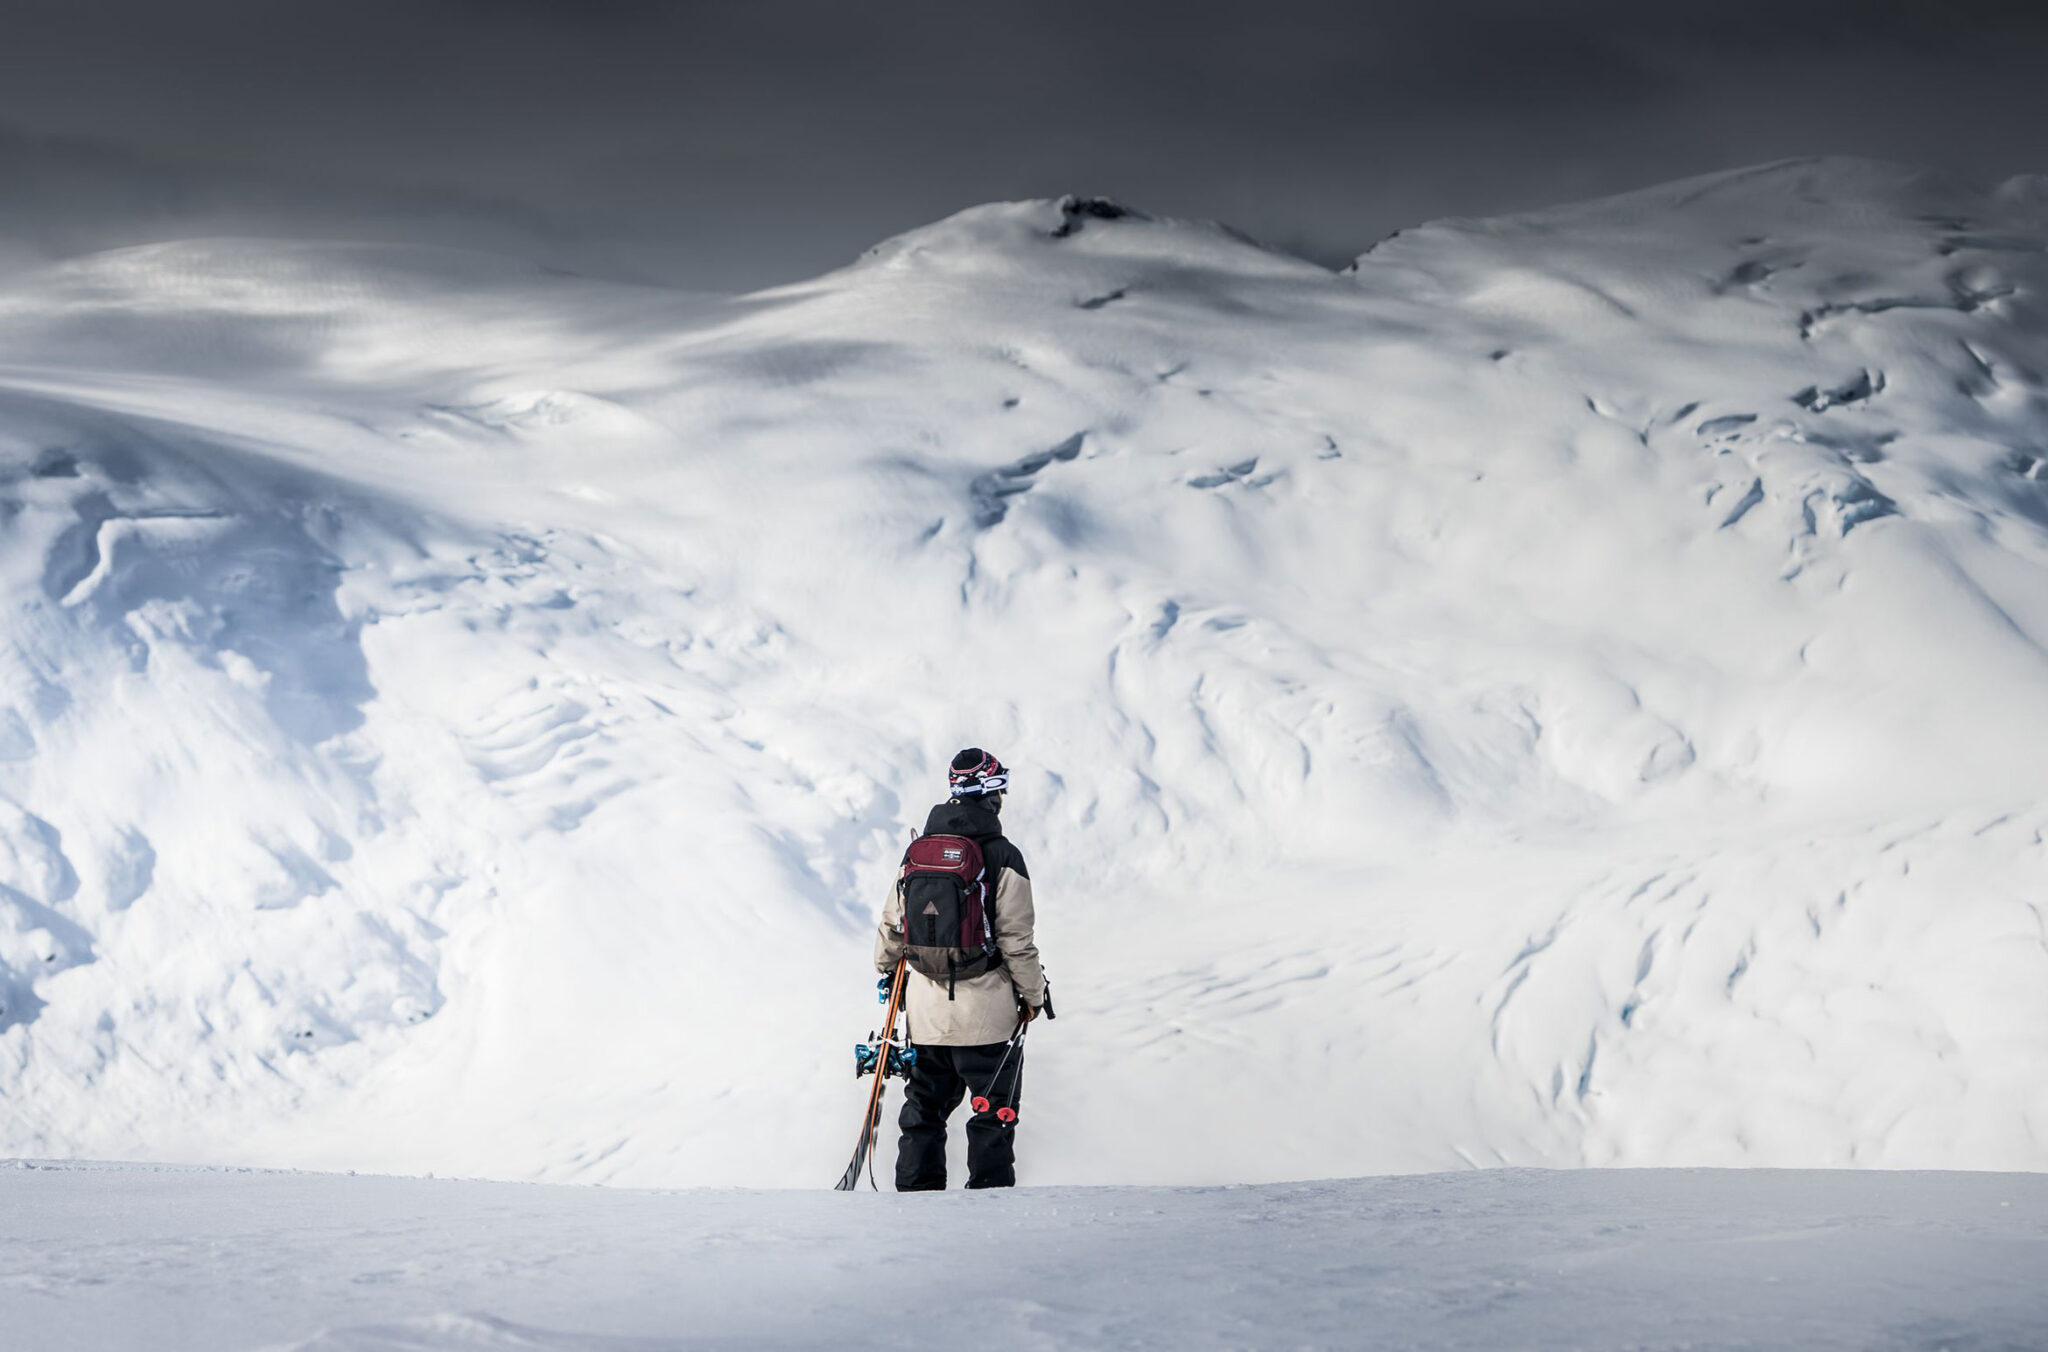 A snowboarder looks out over Whistler's incredible coastal mountain range.